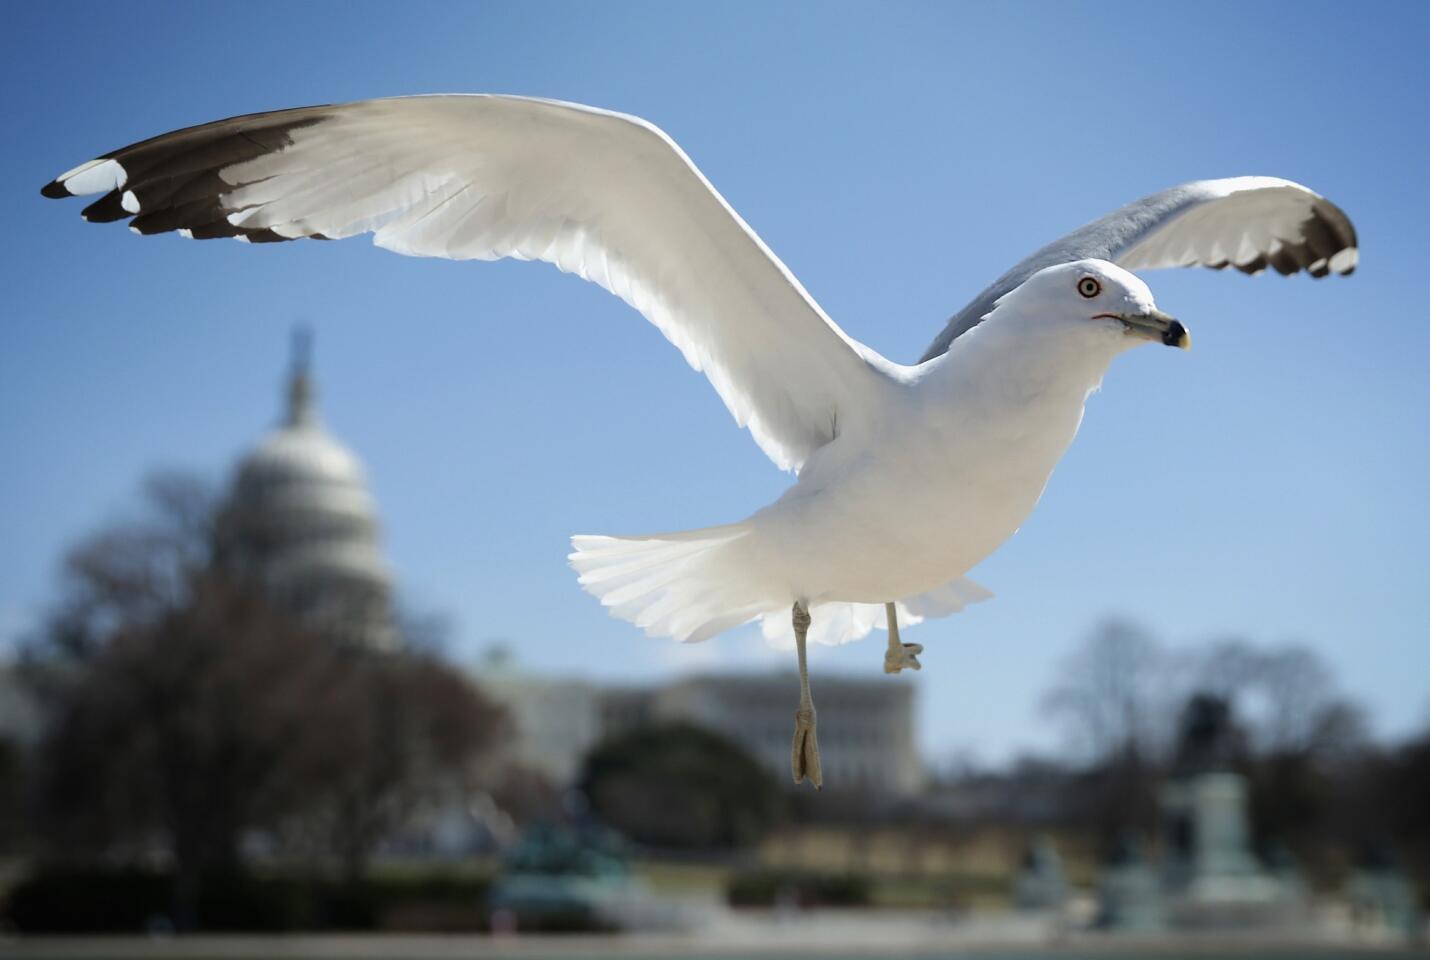 A seagull flies in front of the U.S. Capitol in Washington, D.C., on the first day of spring. The temperature was expected to hit 60 in the area Thursday.